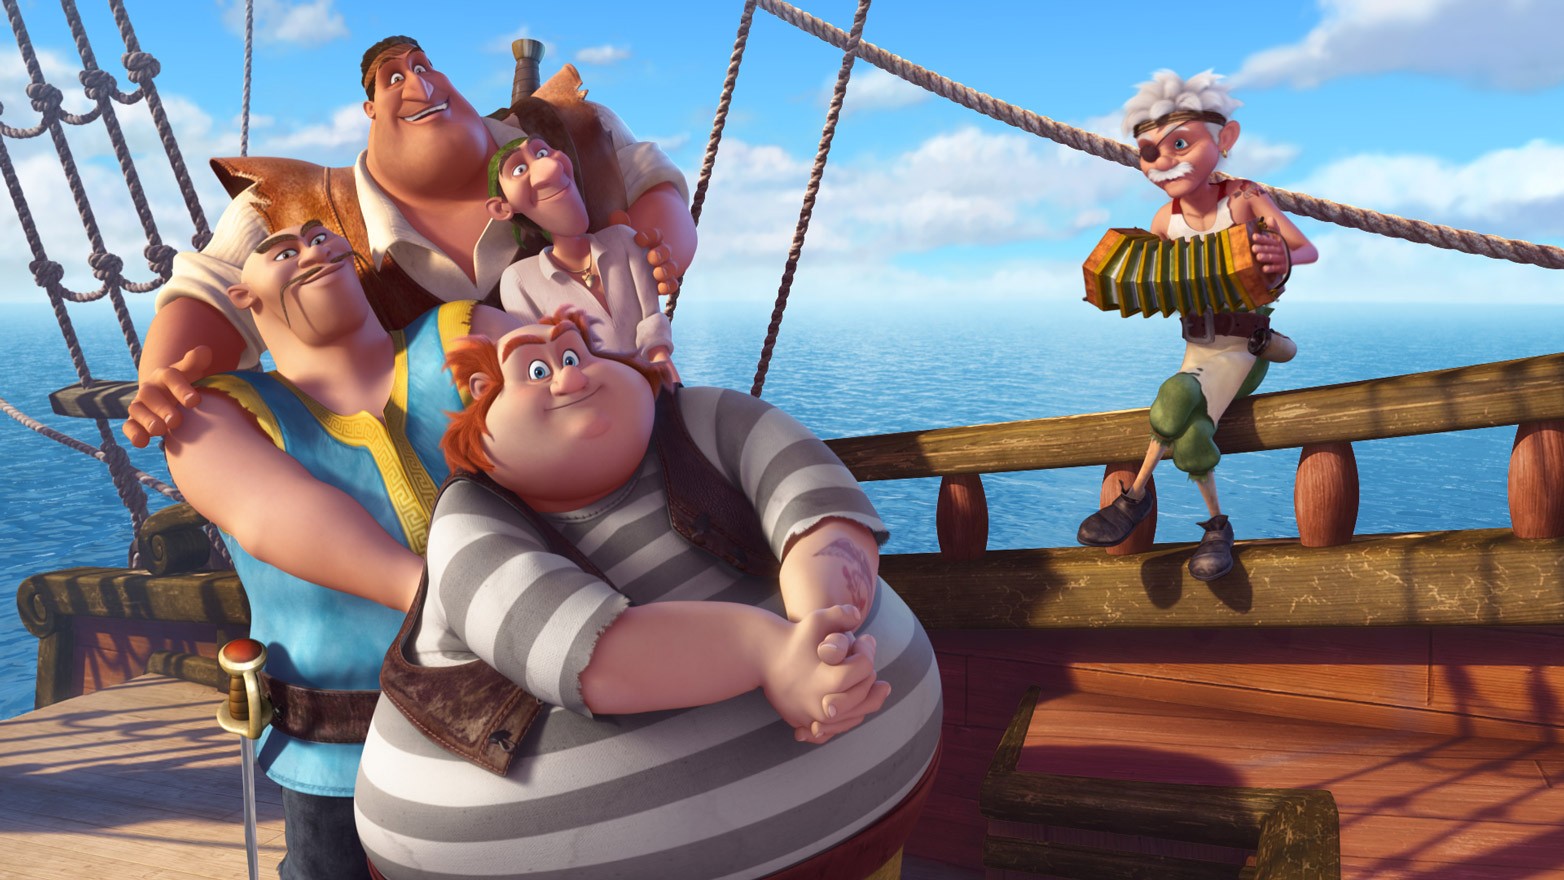 Band of Pirates from Walt Disney Pictures' The Pirate Fairy (2014)